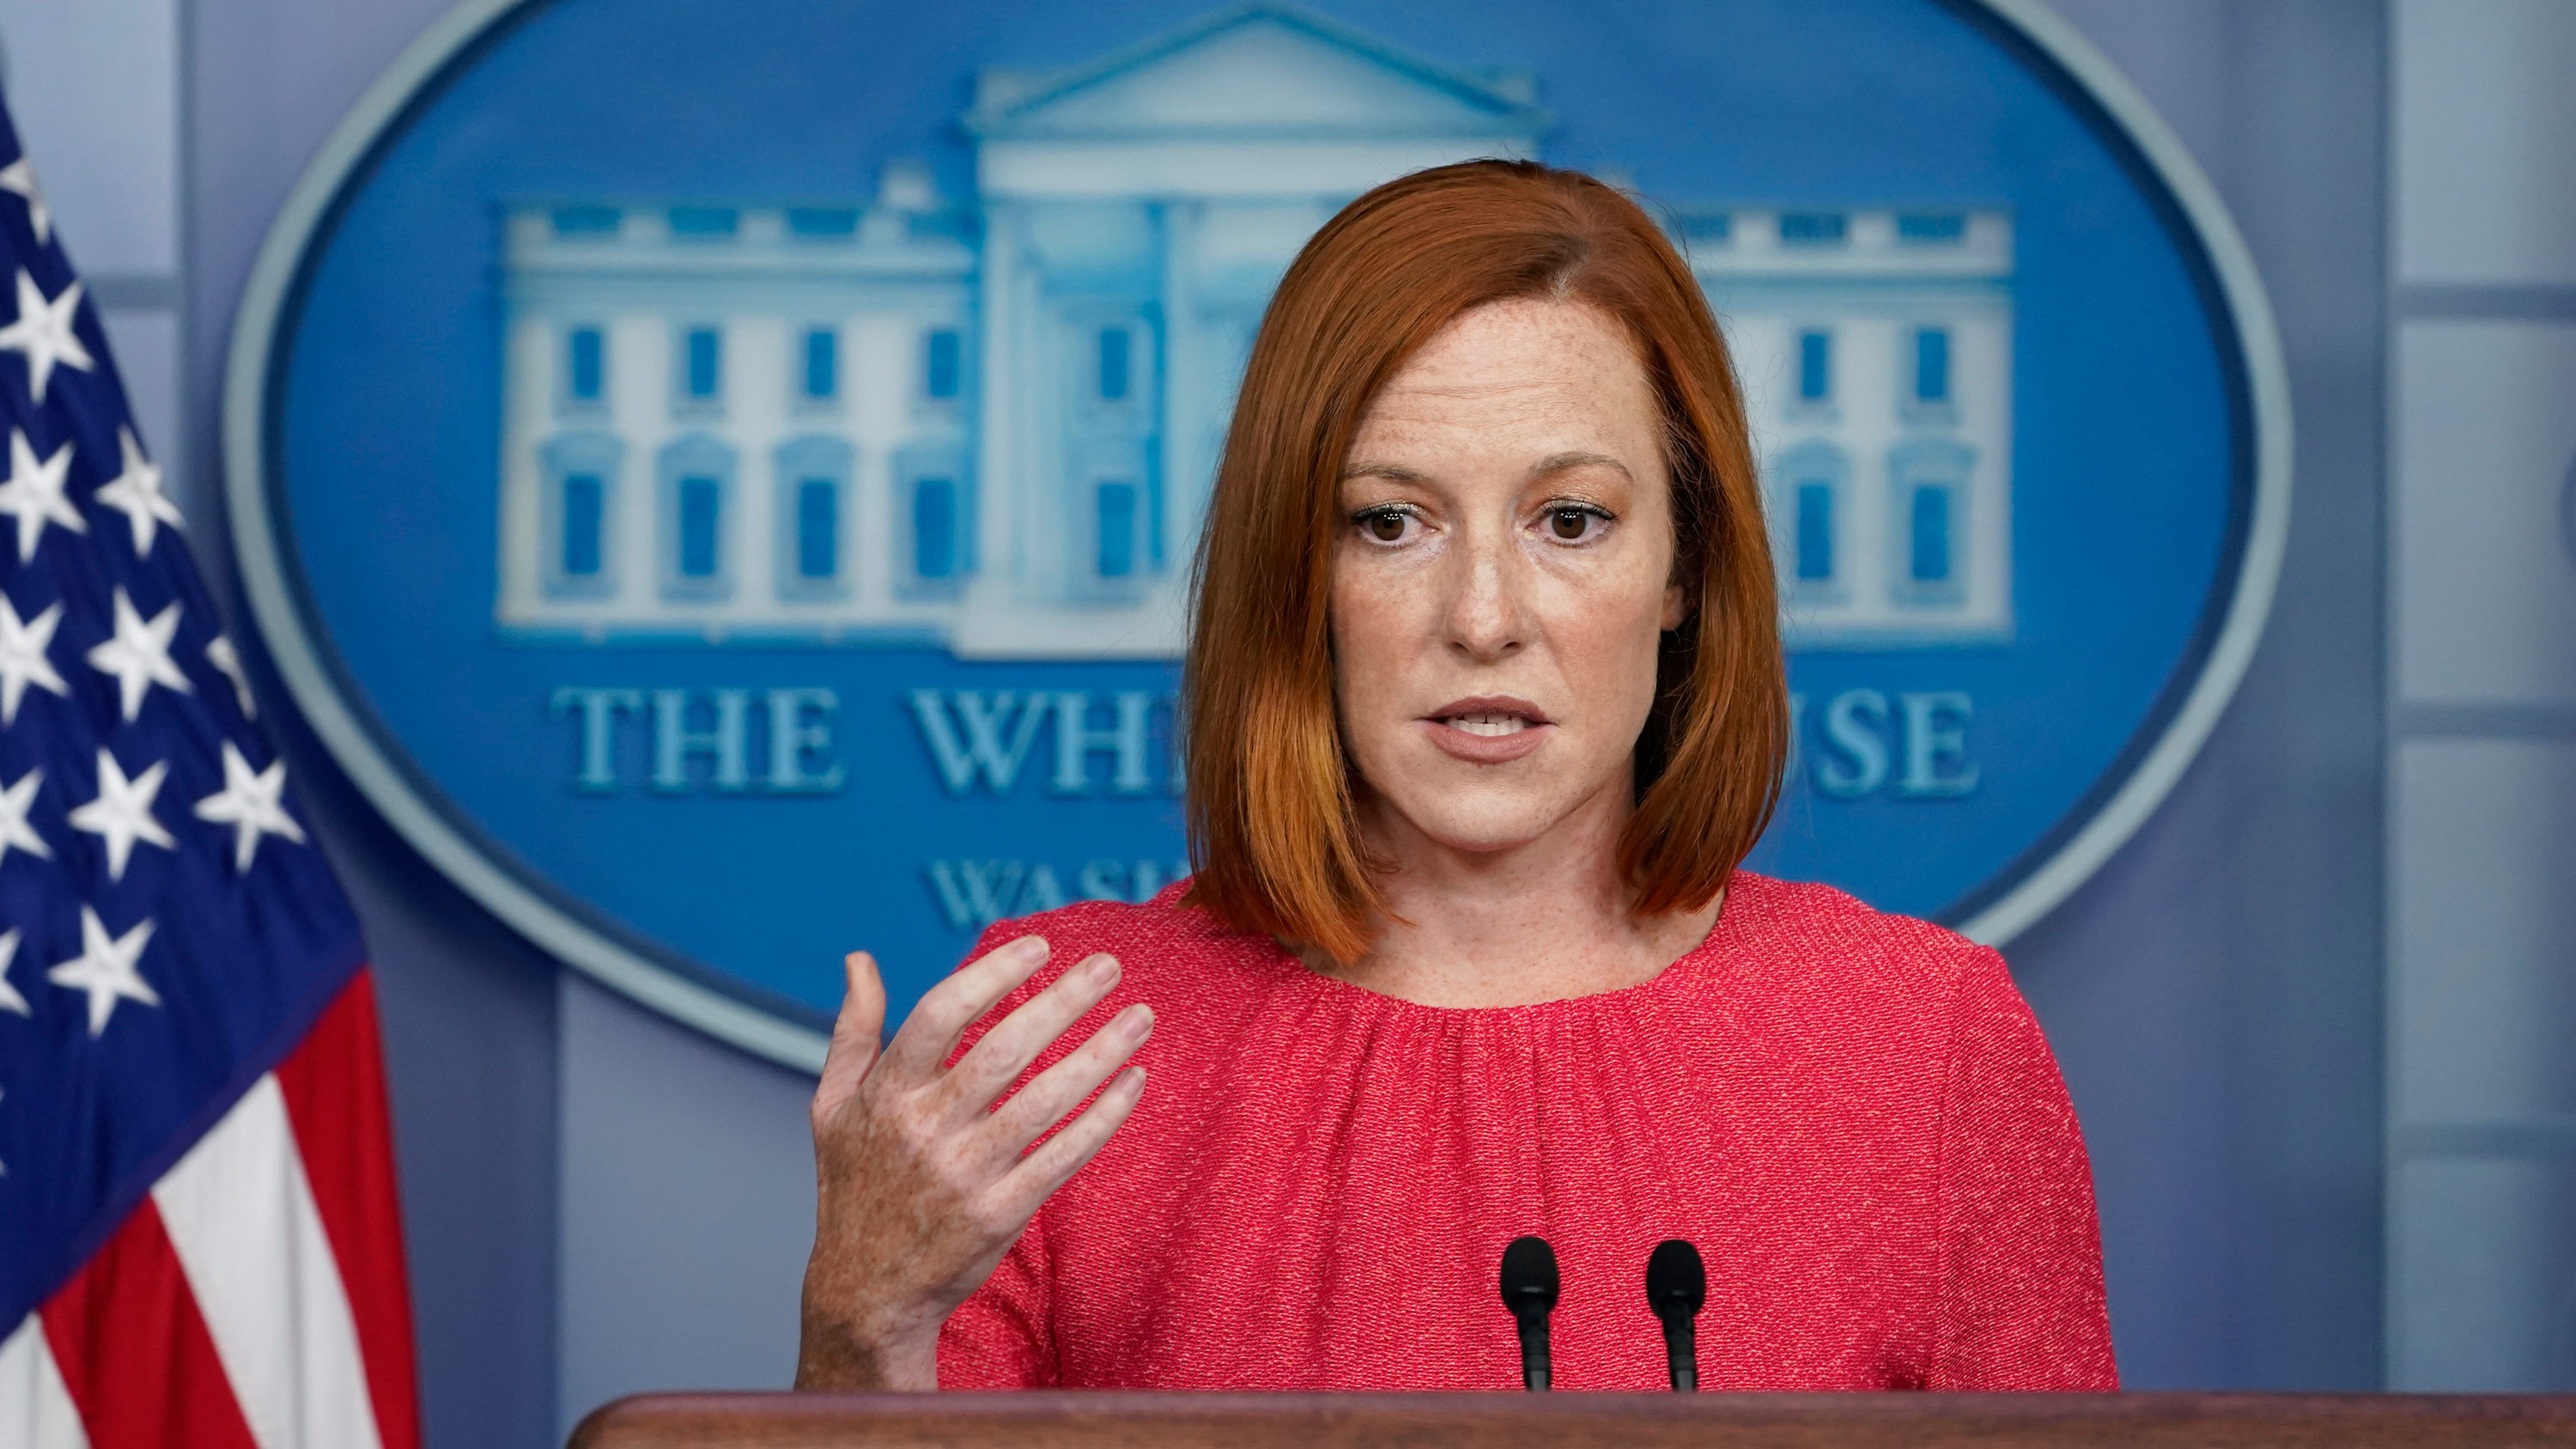 White House press secretary Jen Psaki speaks during the daily briefing at the White House in Washington, DC, on August 26.